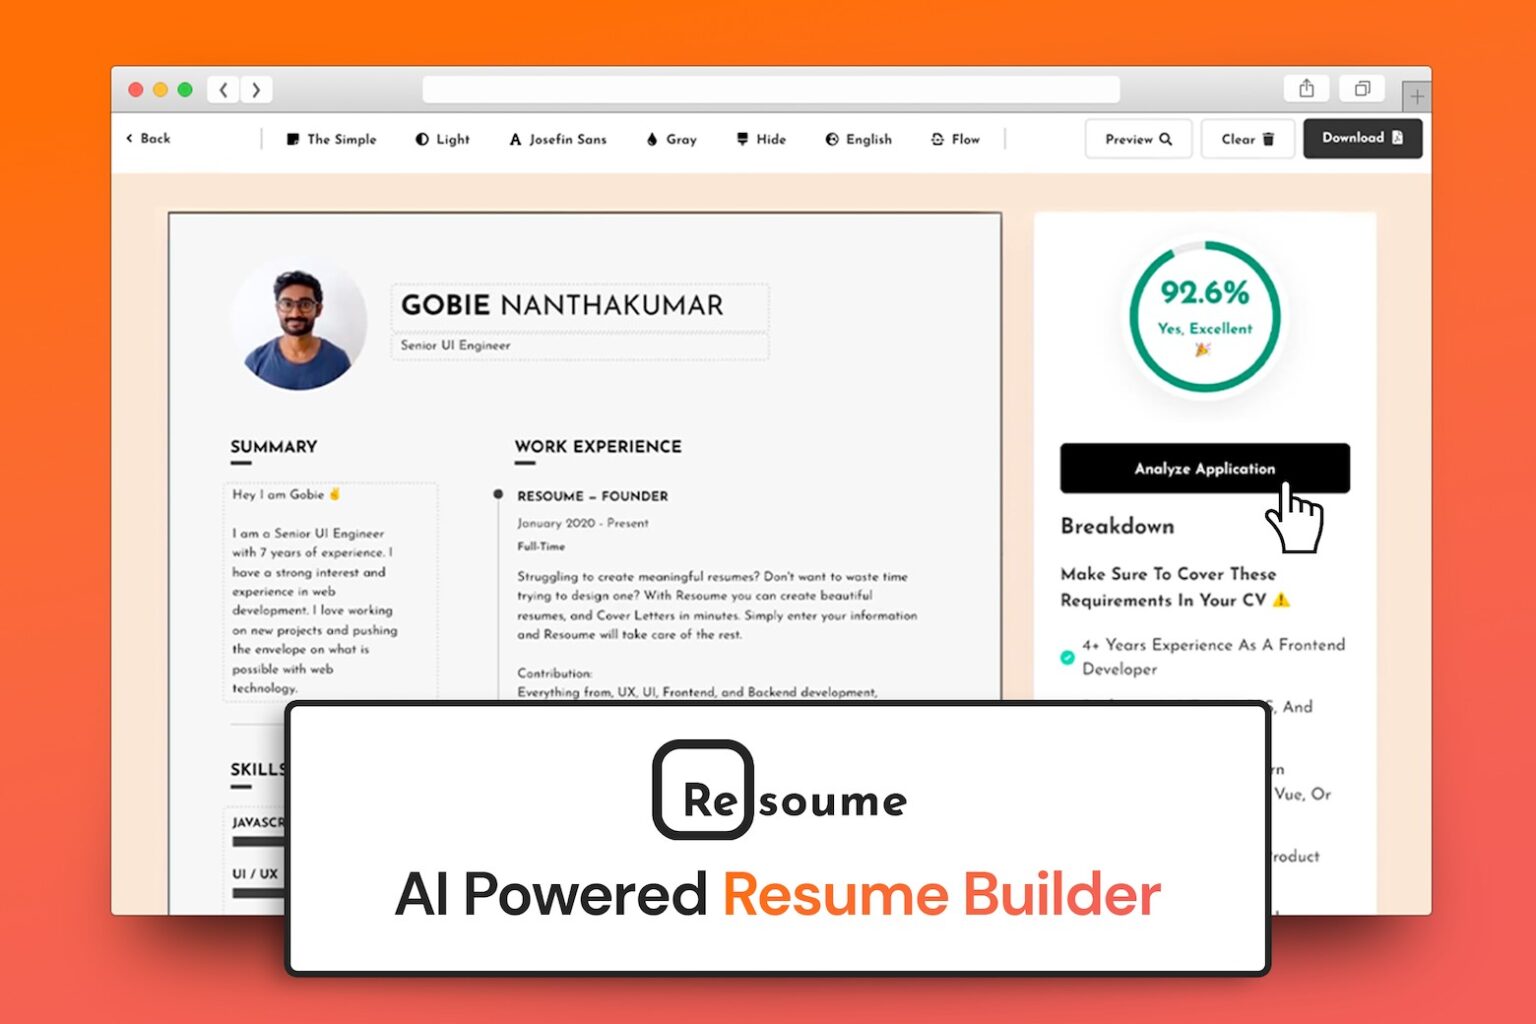 This AI resume writer is only $30 through October 23rd.